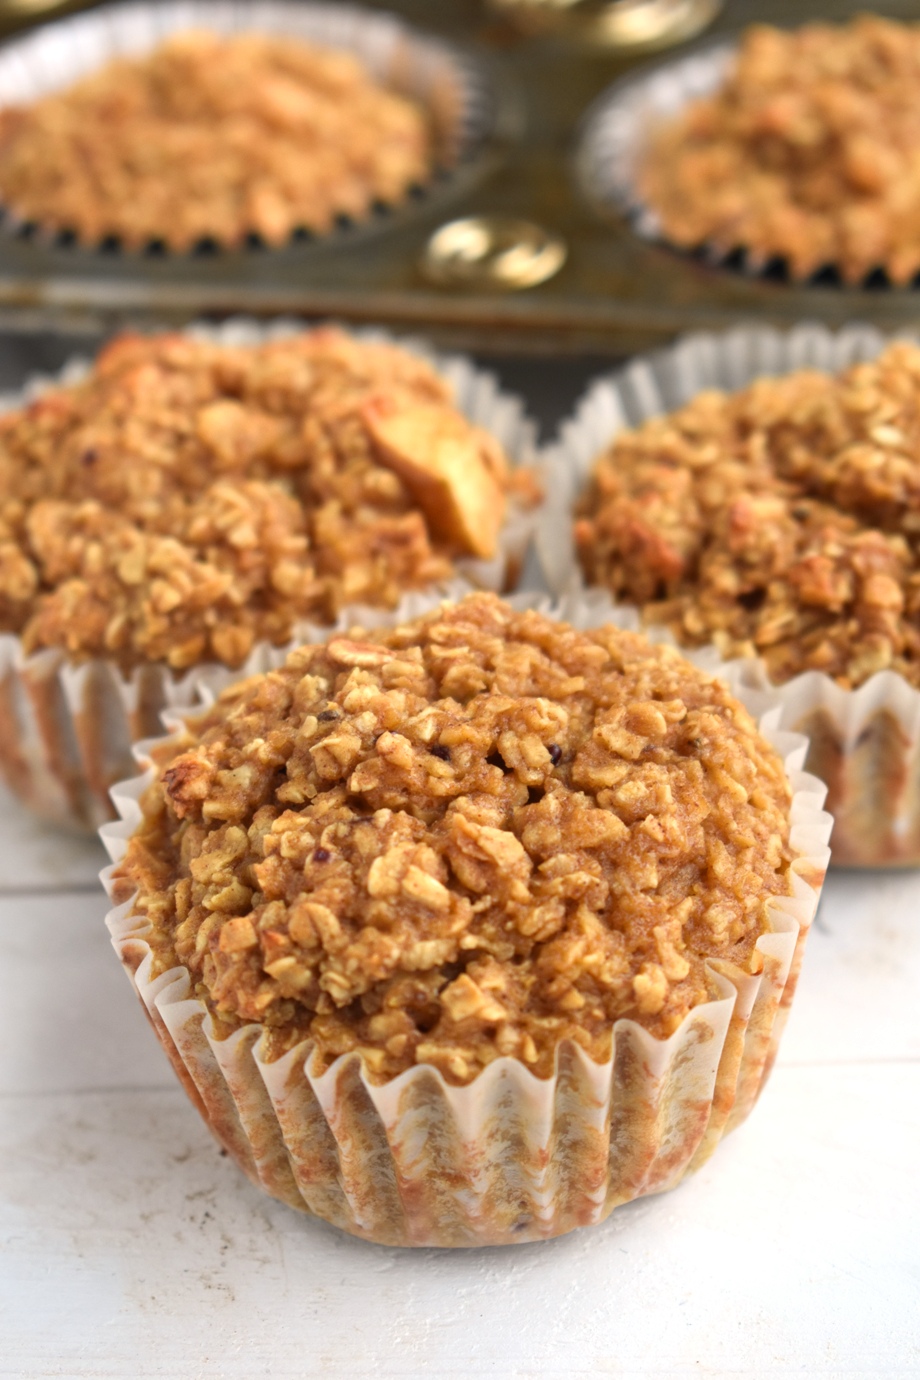 Apple Cinnamon Baked Oatmeal Cups have the texture of a muffin, are perfect for meal prep and are packed with nutrients for a healthy breakfast!